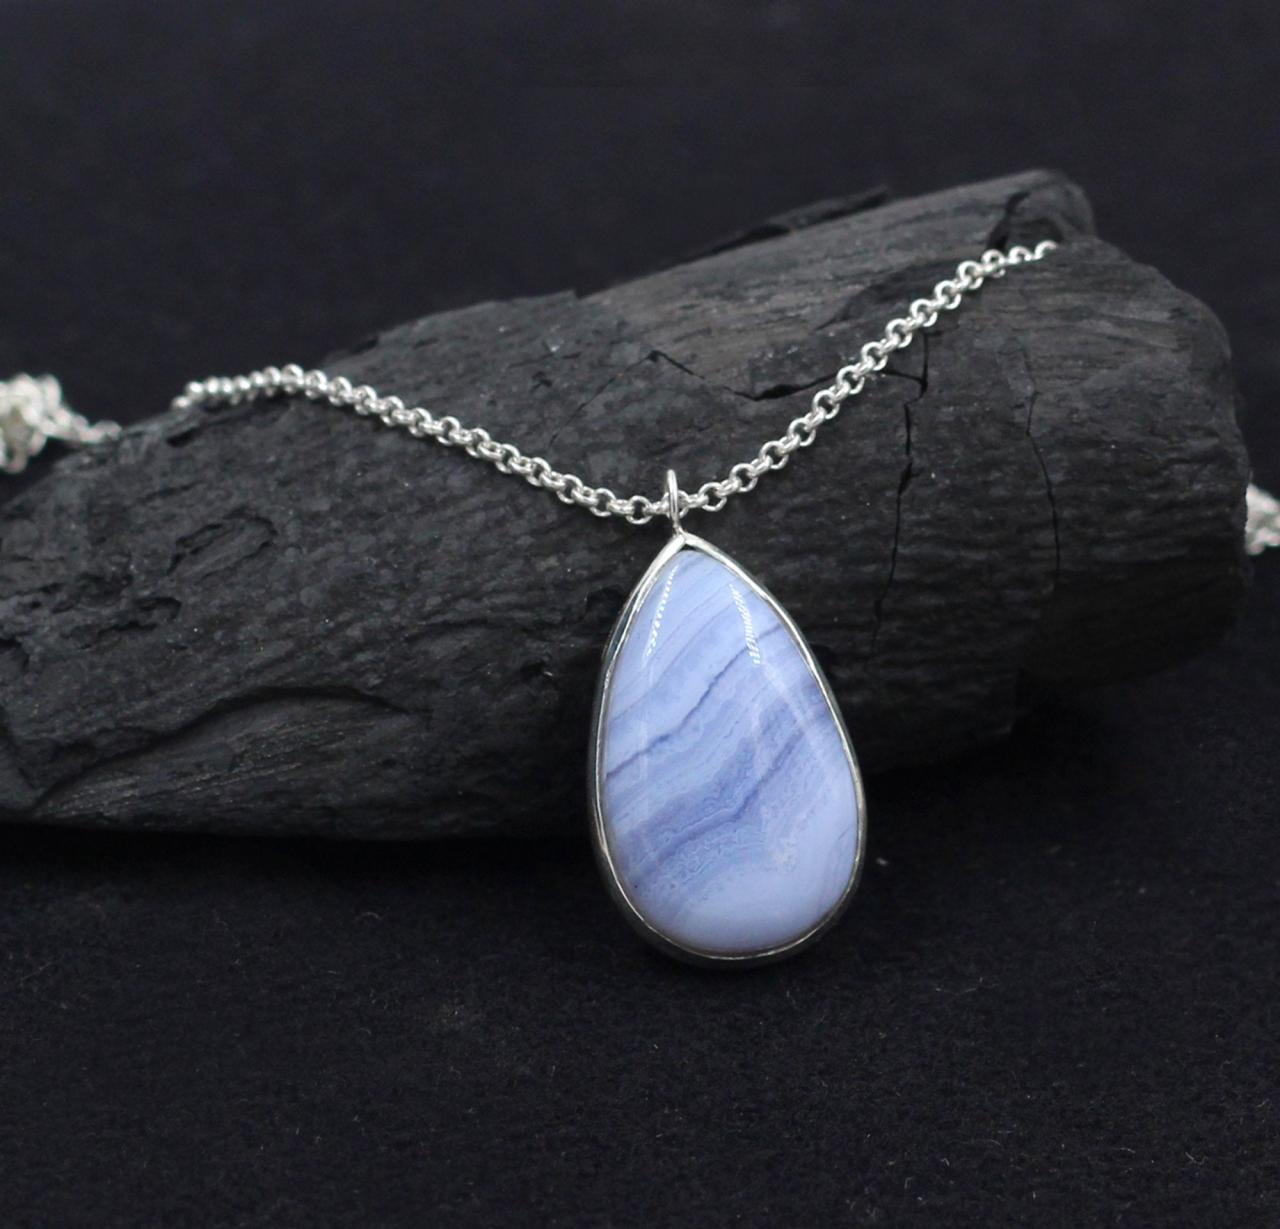 Genuine Blue Lace Agate Necklace,solid 925 Sterling Silver Handmade Jewelry,christmas Gift,anniversary Present,chain Pendant Necklace Gift